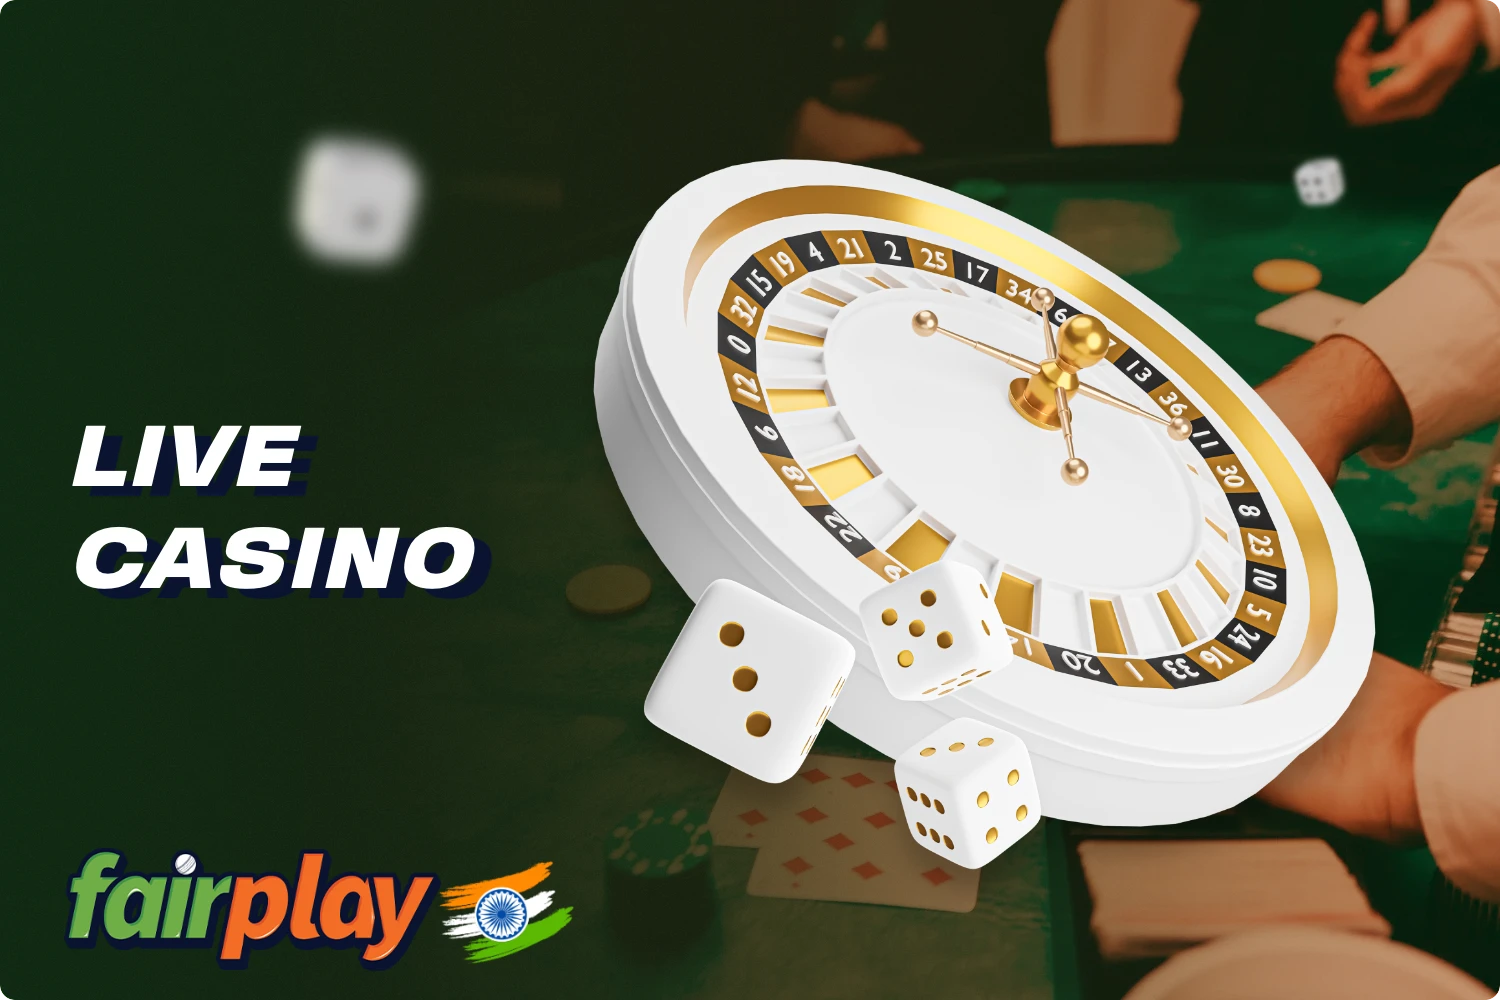 A separate section of Fairplay live casino offers users a variety of games with live dealers